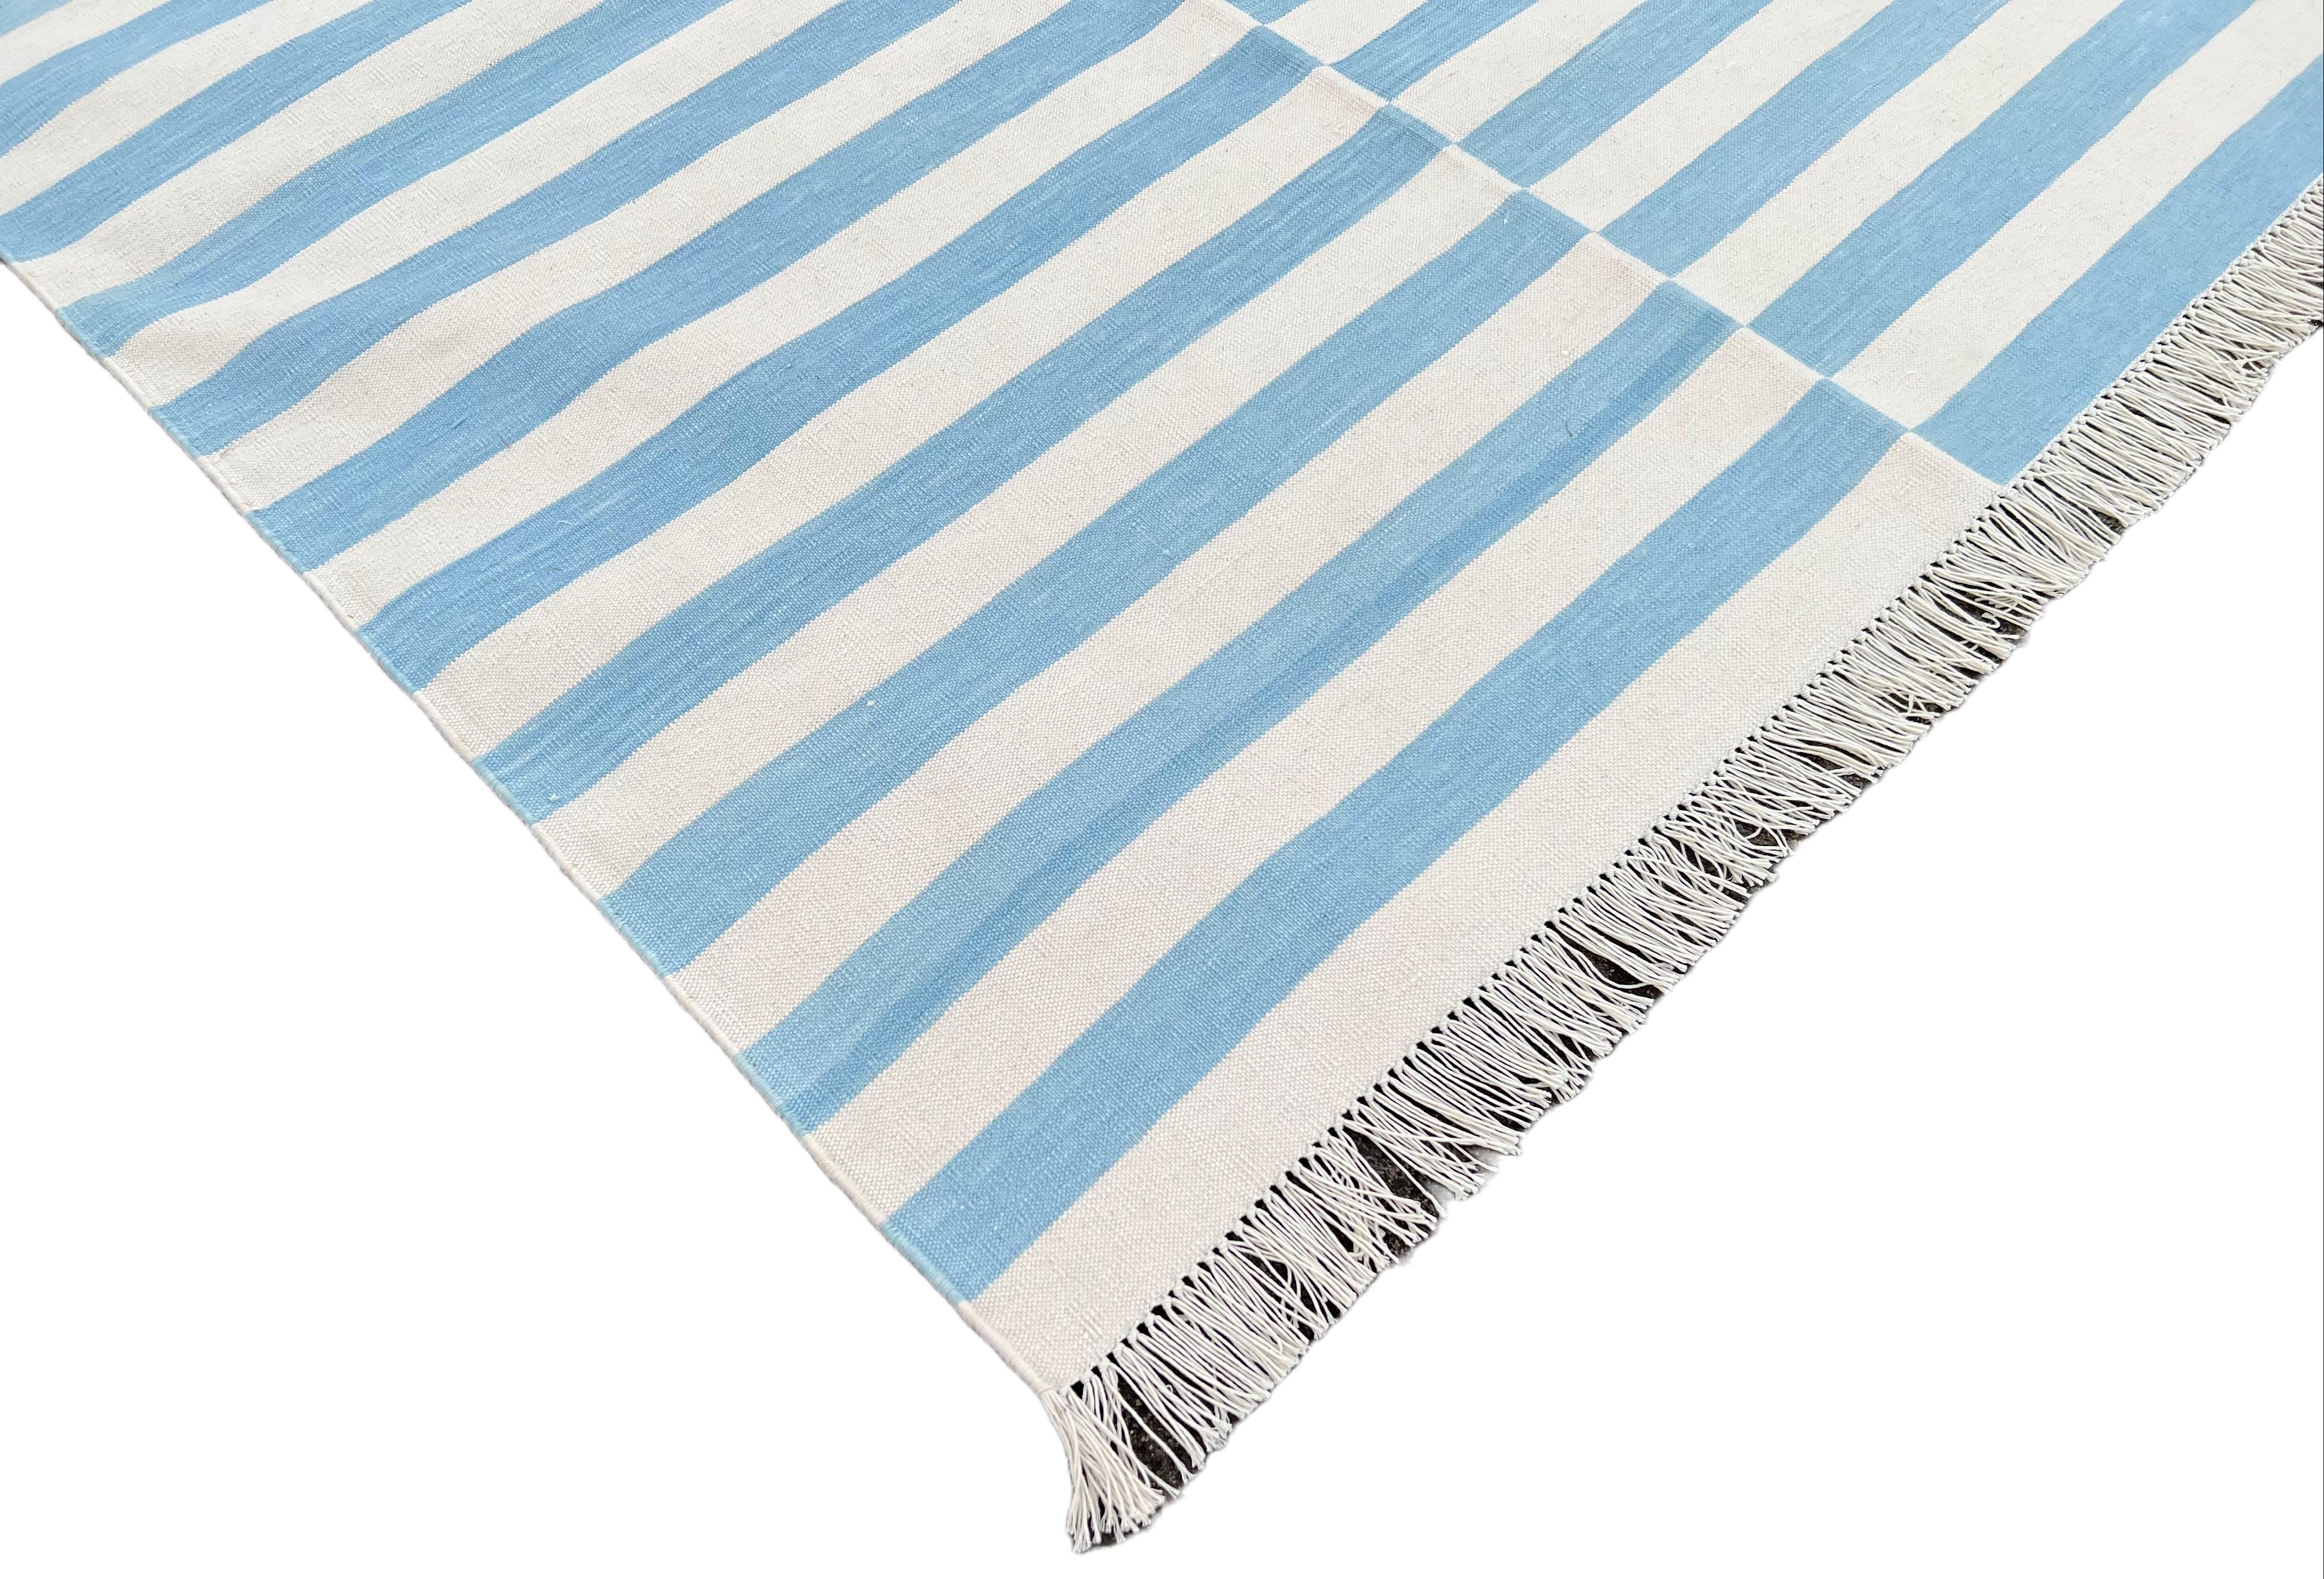 Cotton Vegetable Dyed Reversible Sky Blue And White Striped Indian Dhurrie Rug - 8'x10'
These special flat-weave dhurries are hand-woven with 15 ply 100% cotton yarn. Due to the special manufacturing techniques used to create our rugs, the size and